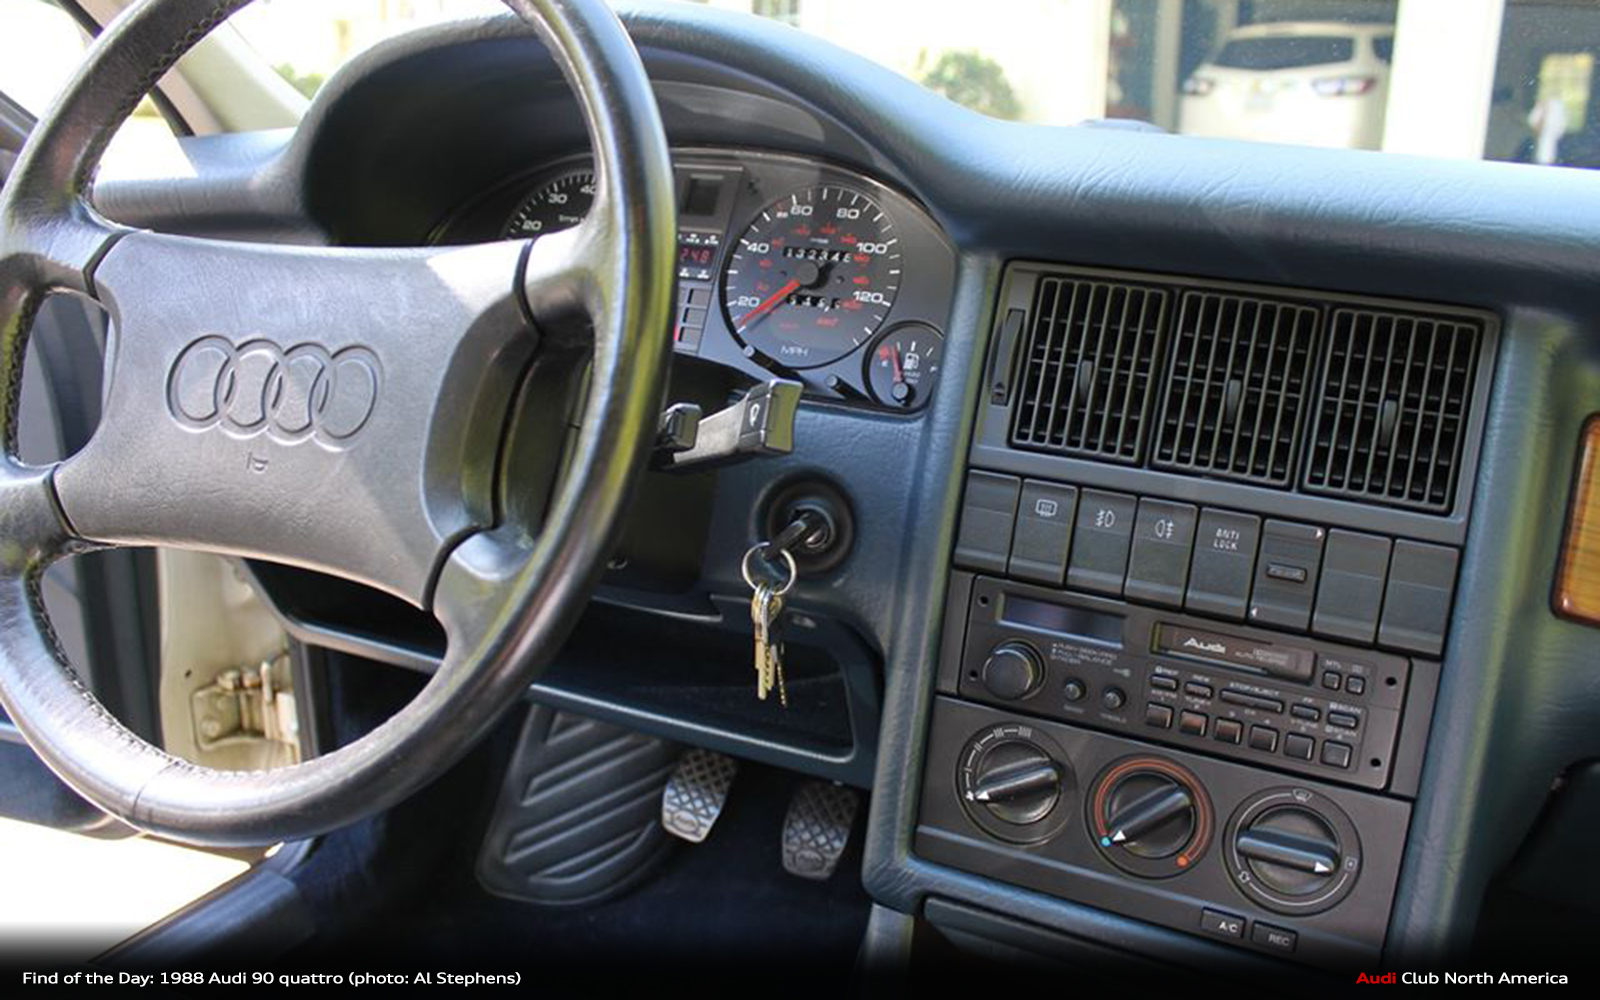 The owner chat Cottage Find of the Day 1988 Audi 90 quattro 31 - Audi Club North America